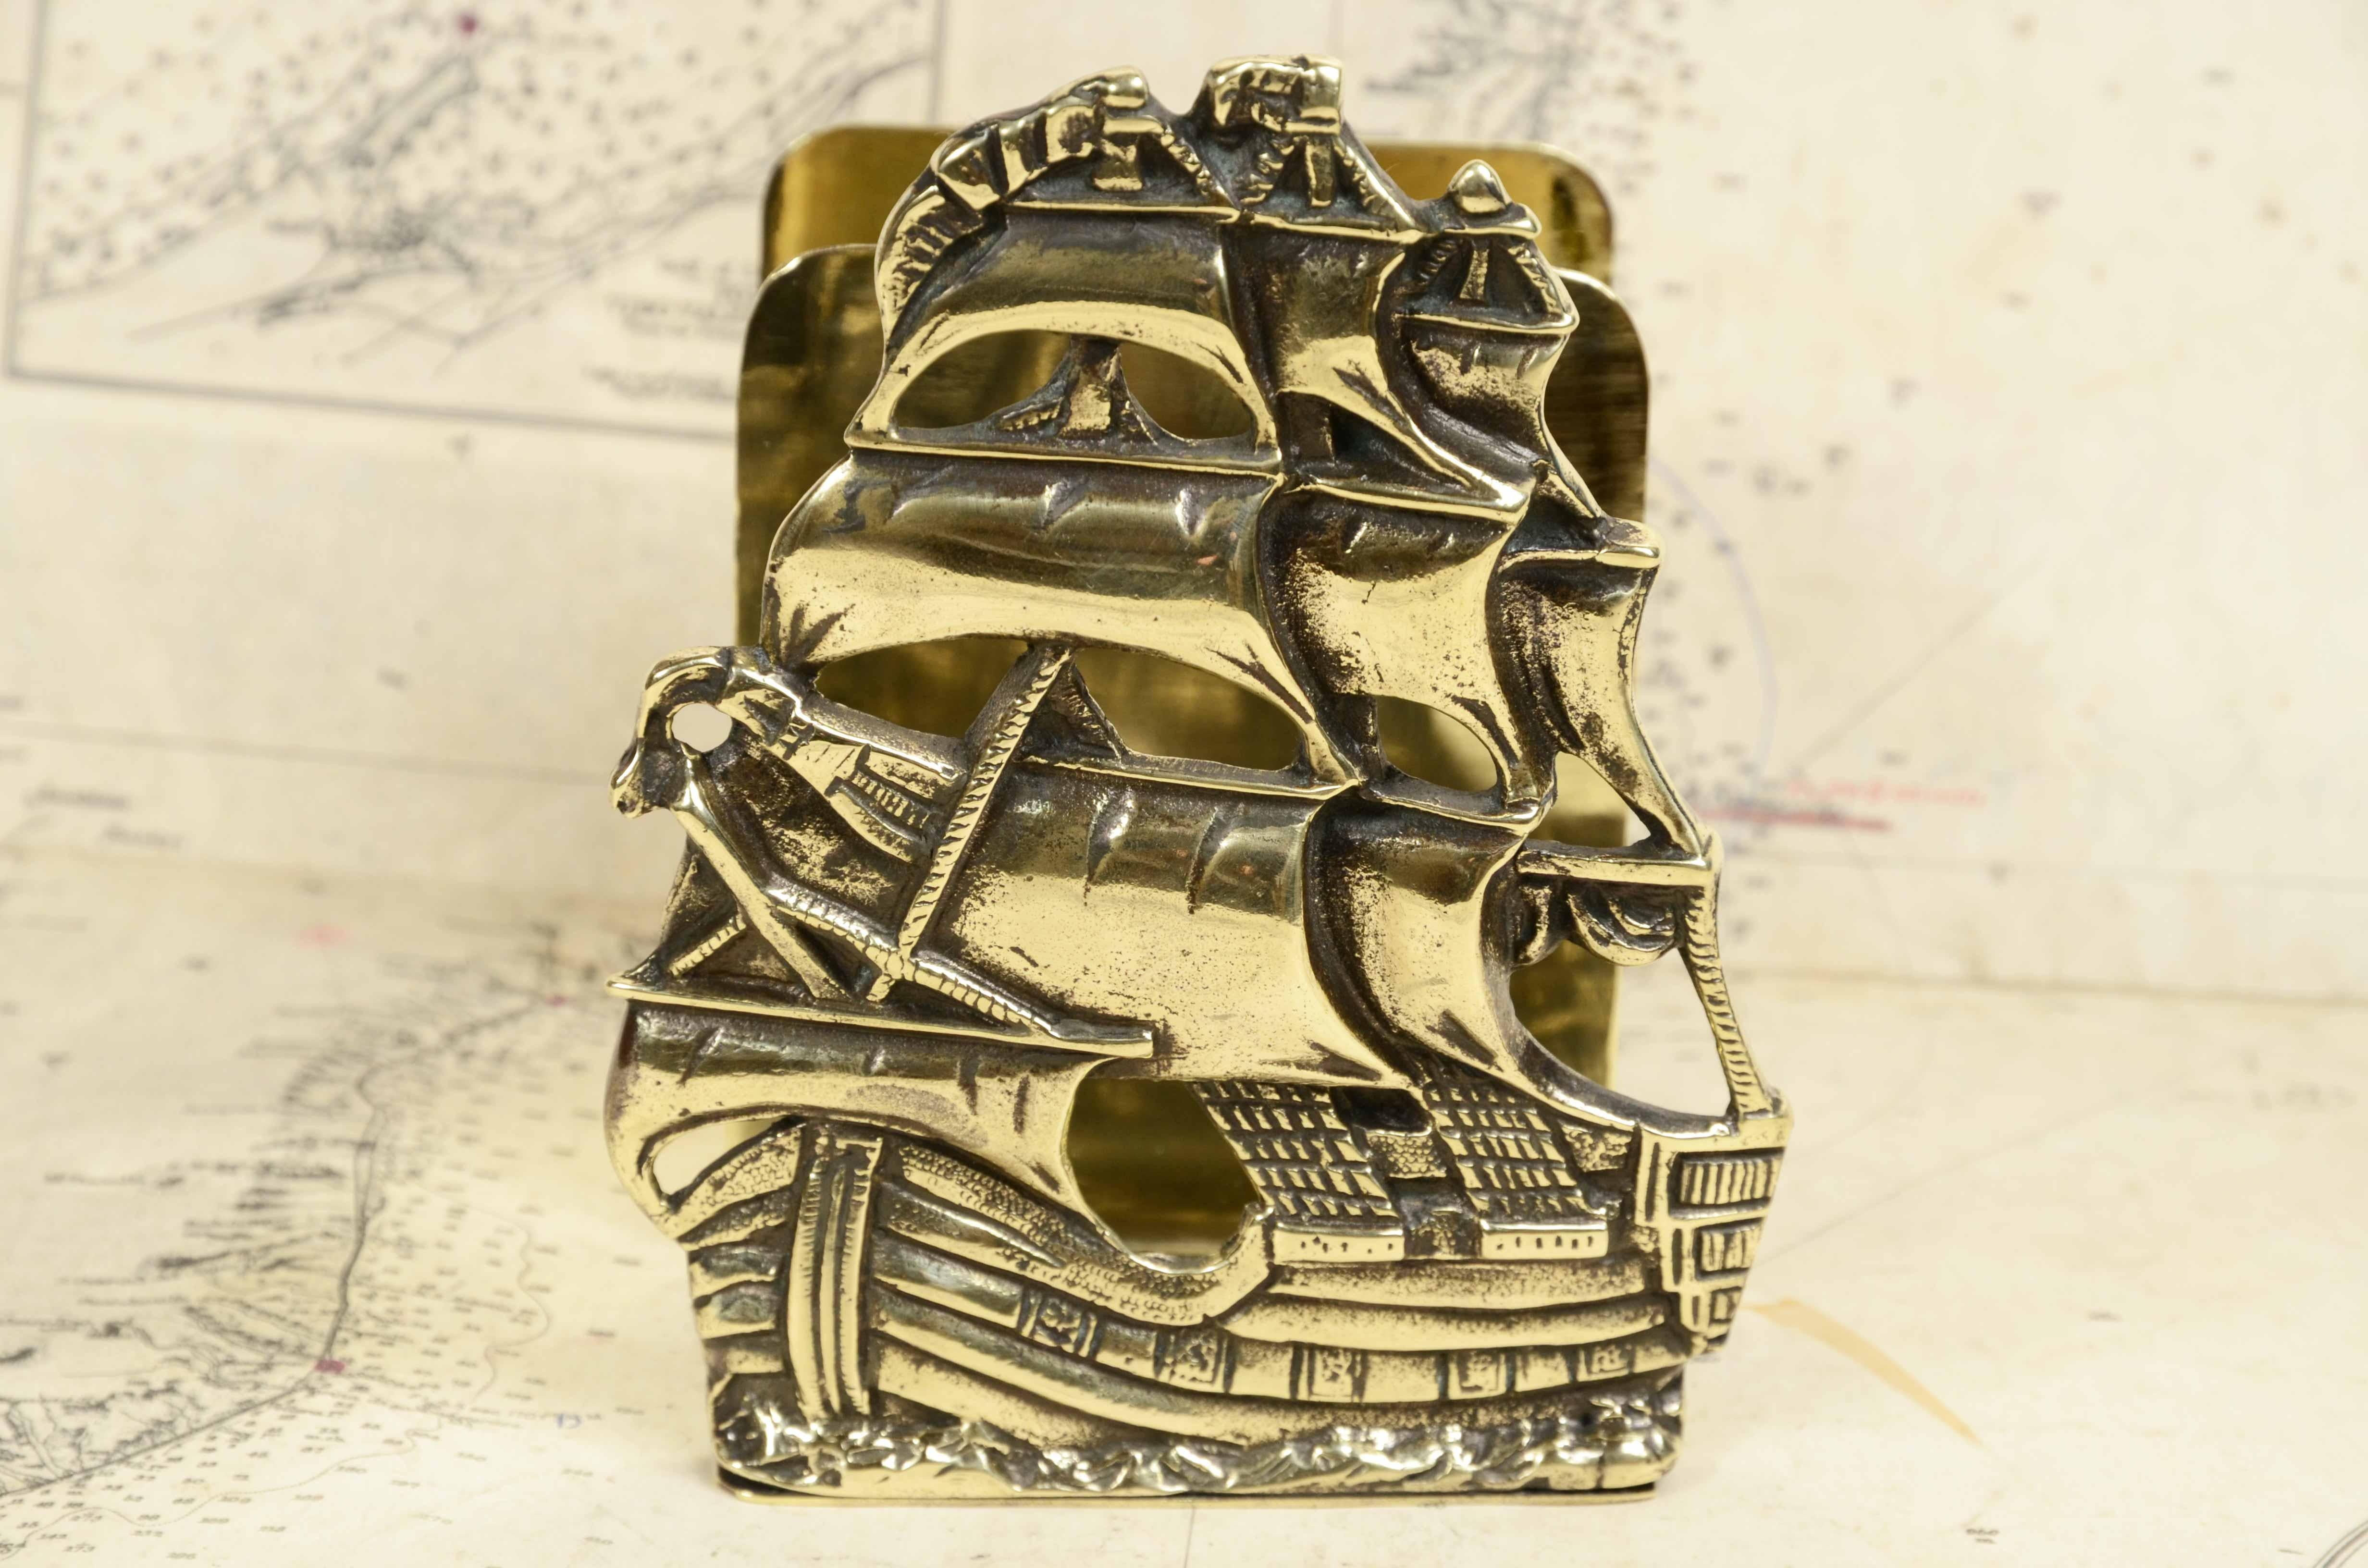 Brass letter holder with two  compartments depicting vessel with unfurled sails, lost-wax casting, early 20th century English manufacture.
Measures 11.5x11x14.5 cm - inches 4.4x4.3x5.7.
The Vessel, developed from the galleon, became from the 17th